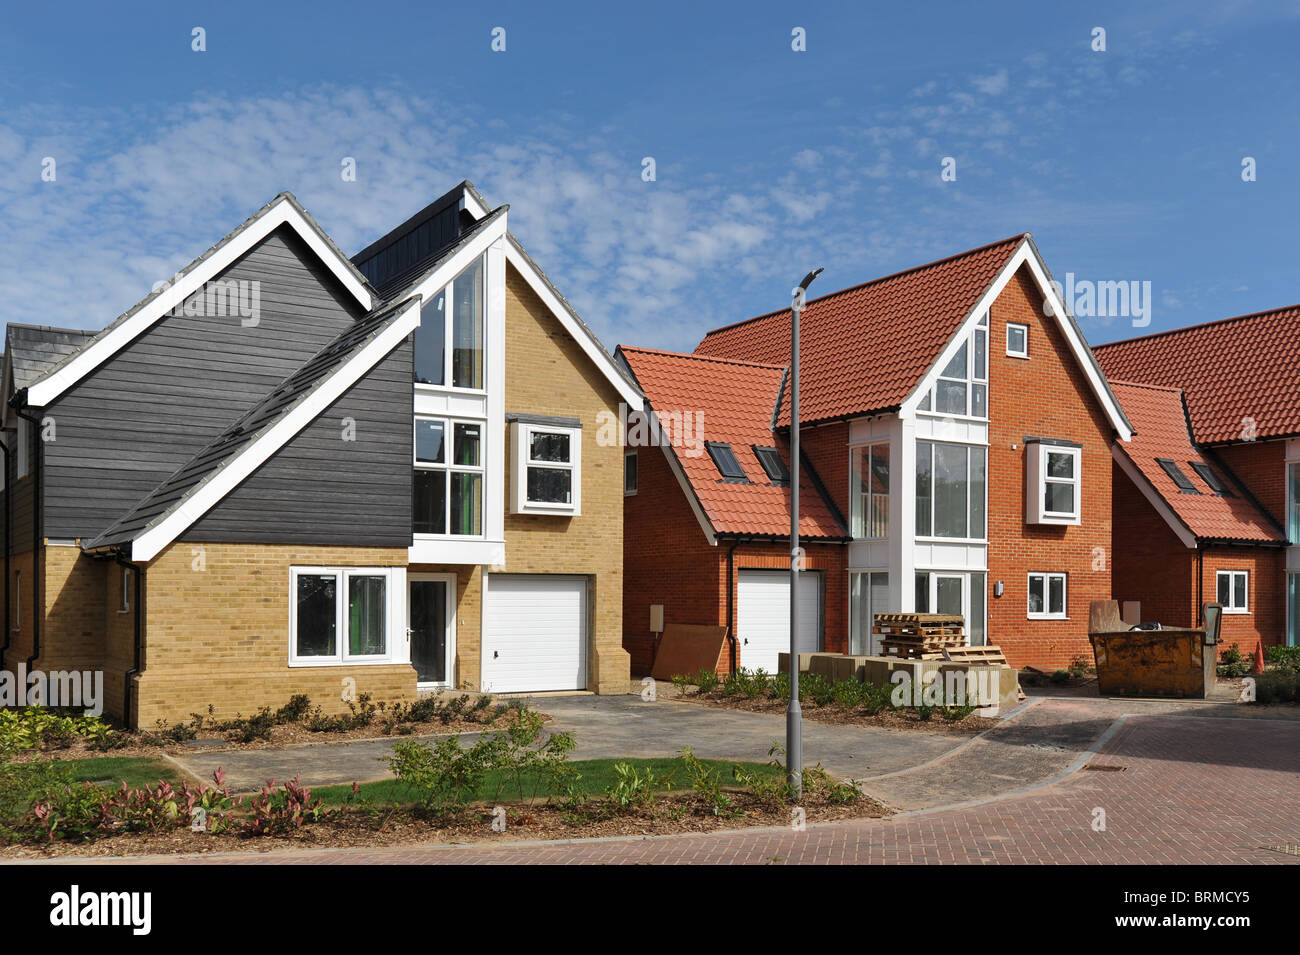 Just completed new luxury houses. Image taken in Kent, UK Stock Photo